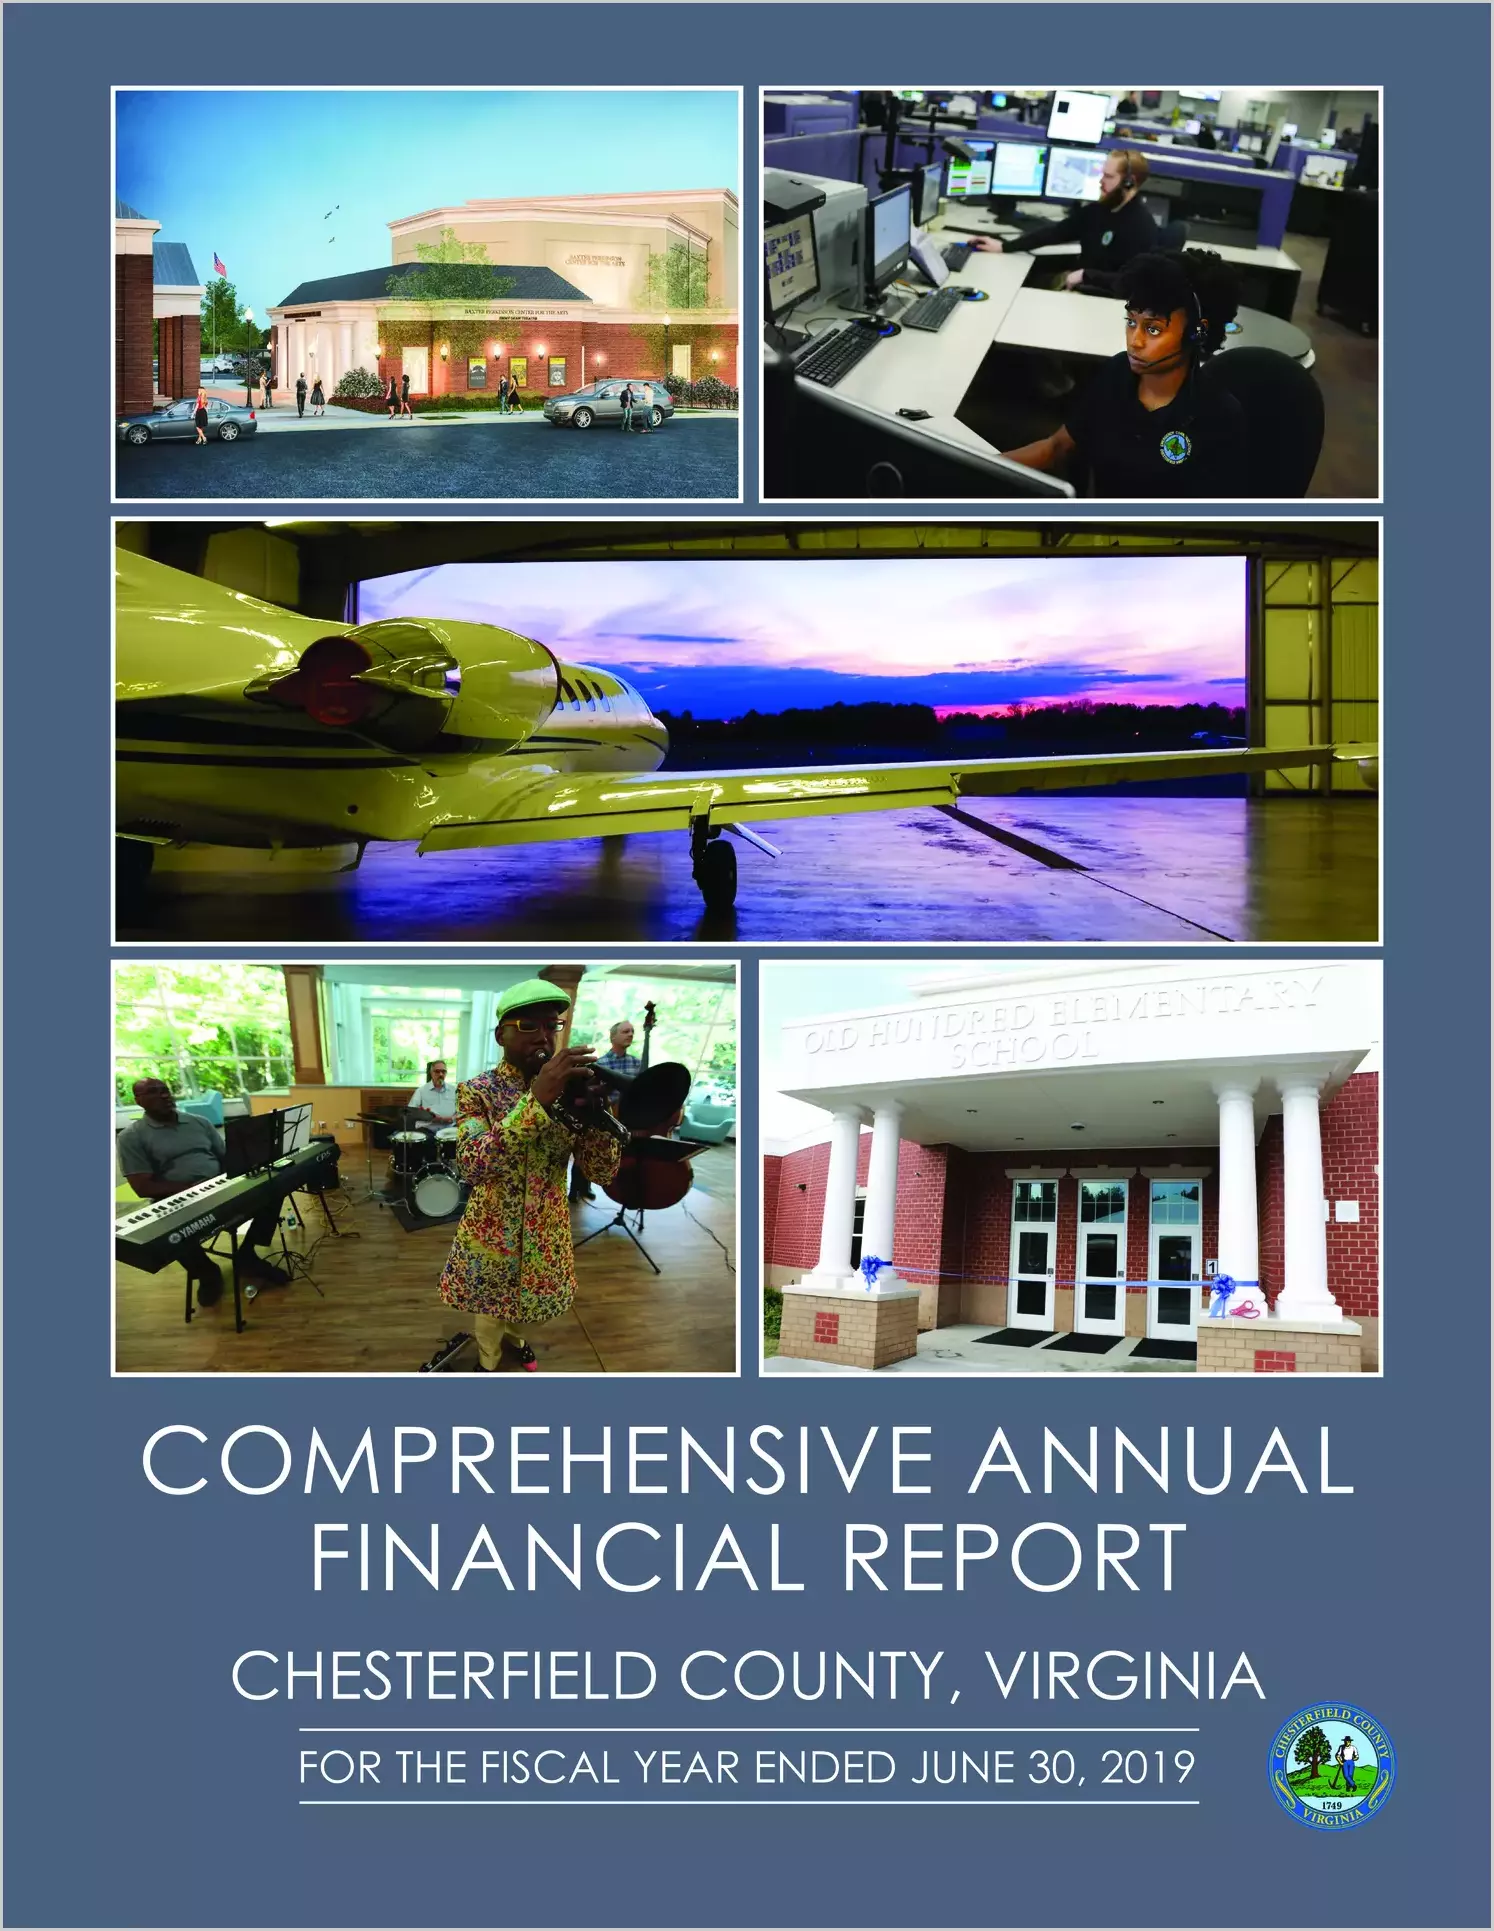 2019 Annual Financial Report for County of Chesterfield